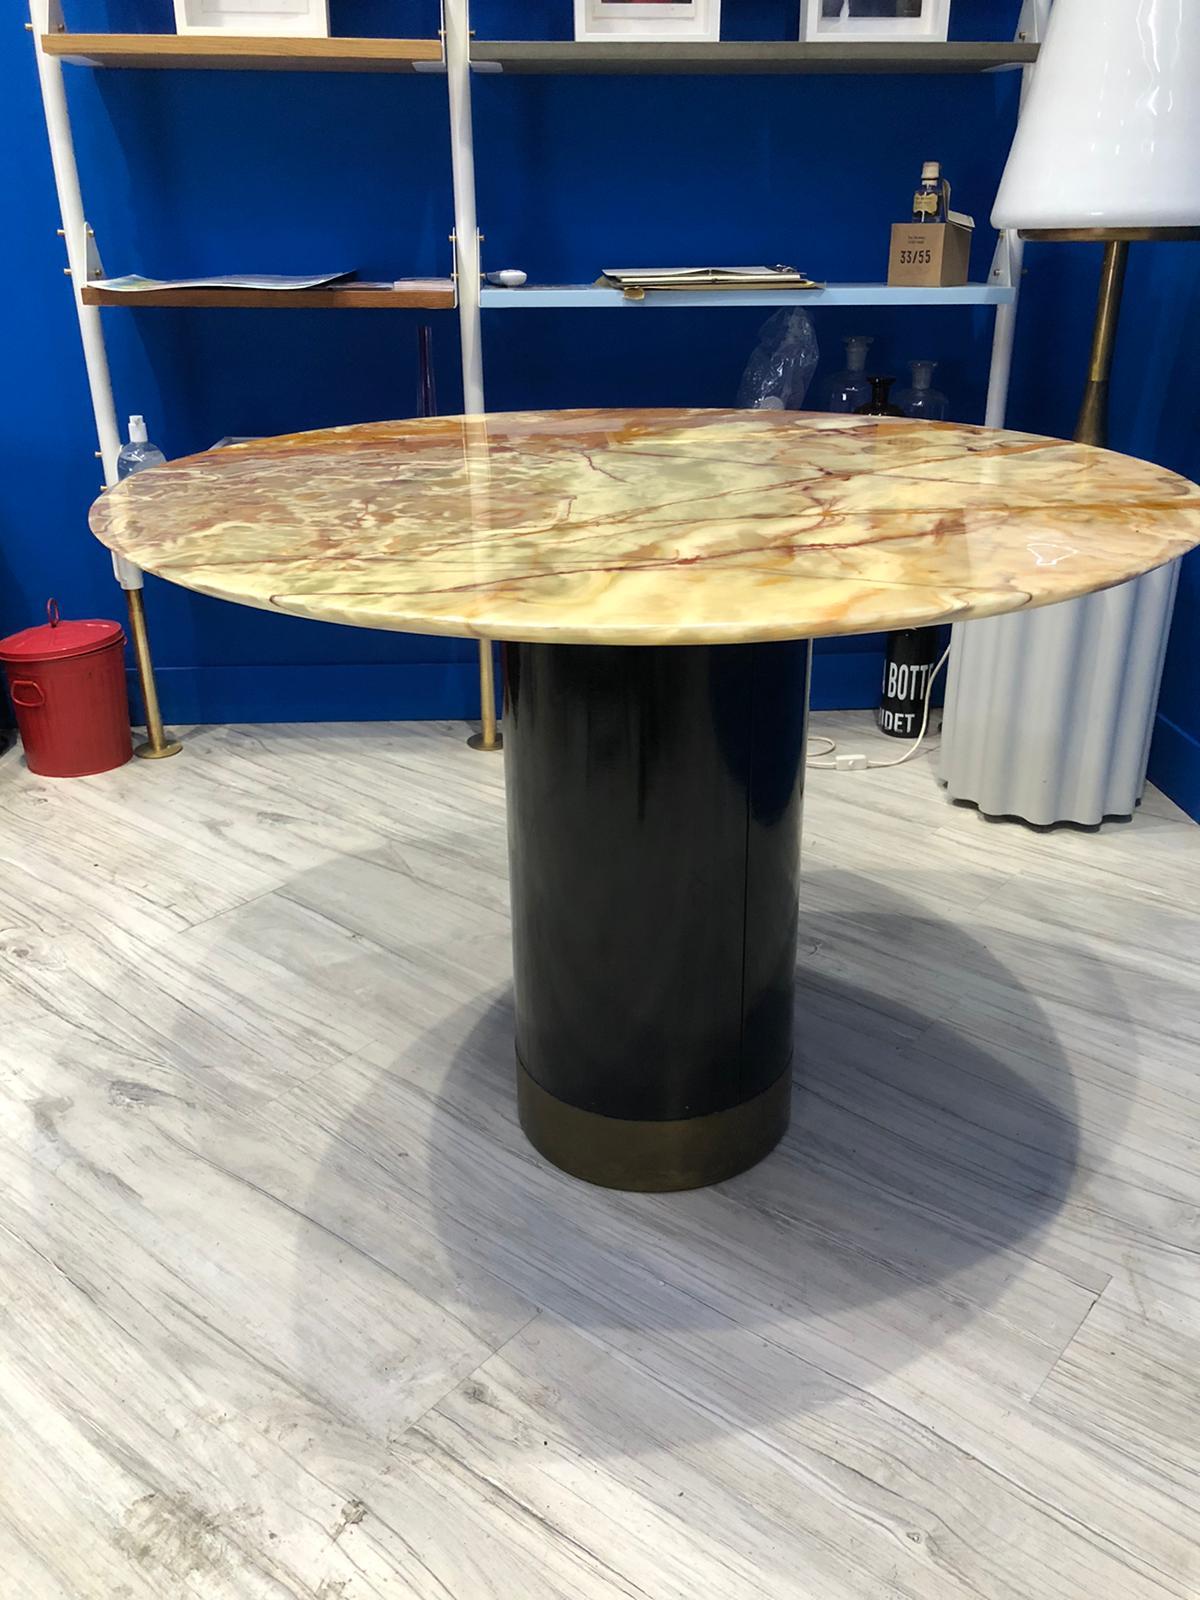 Italian Round Table 1950s Onyx Marble Top Wiith Black Wooden Base and Brass Band 2